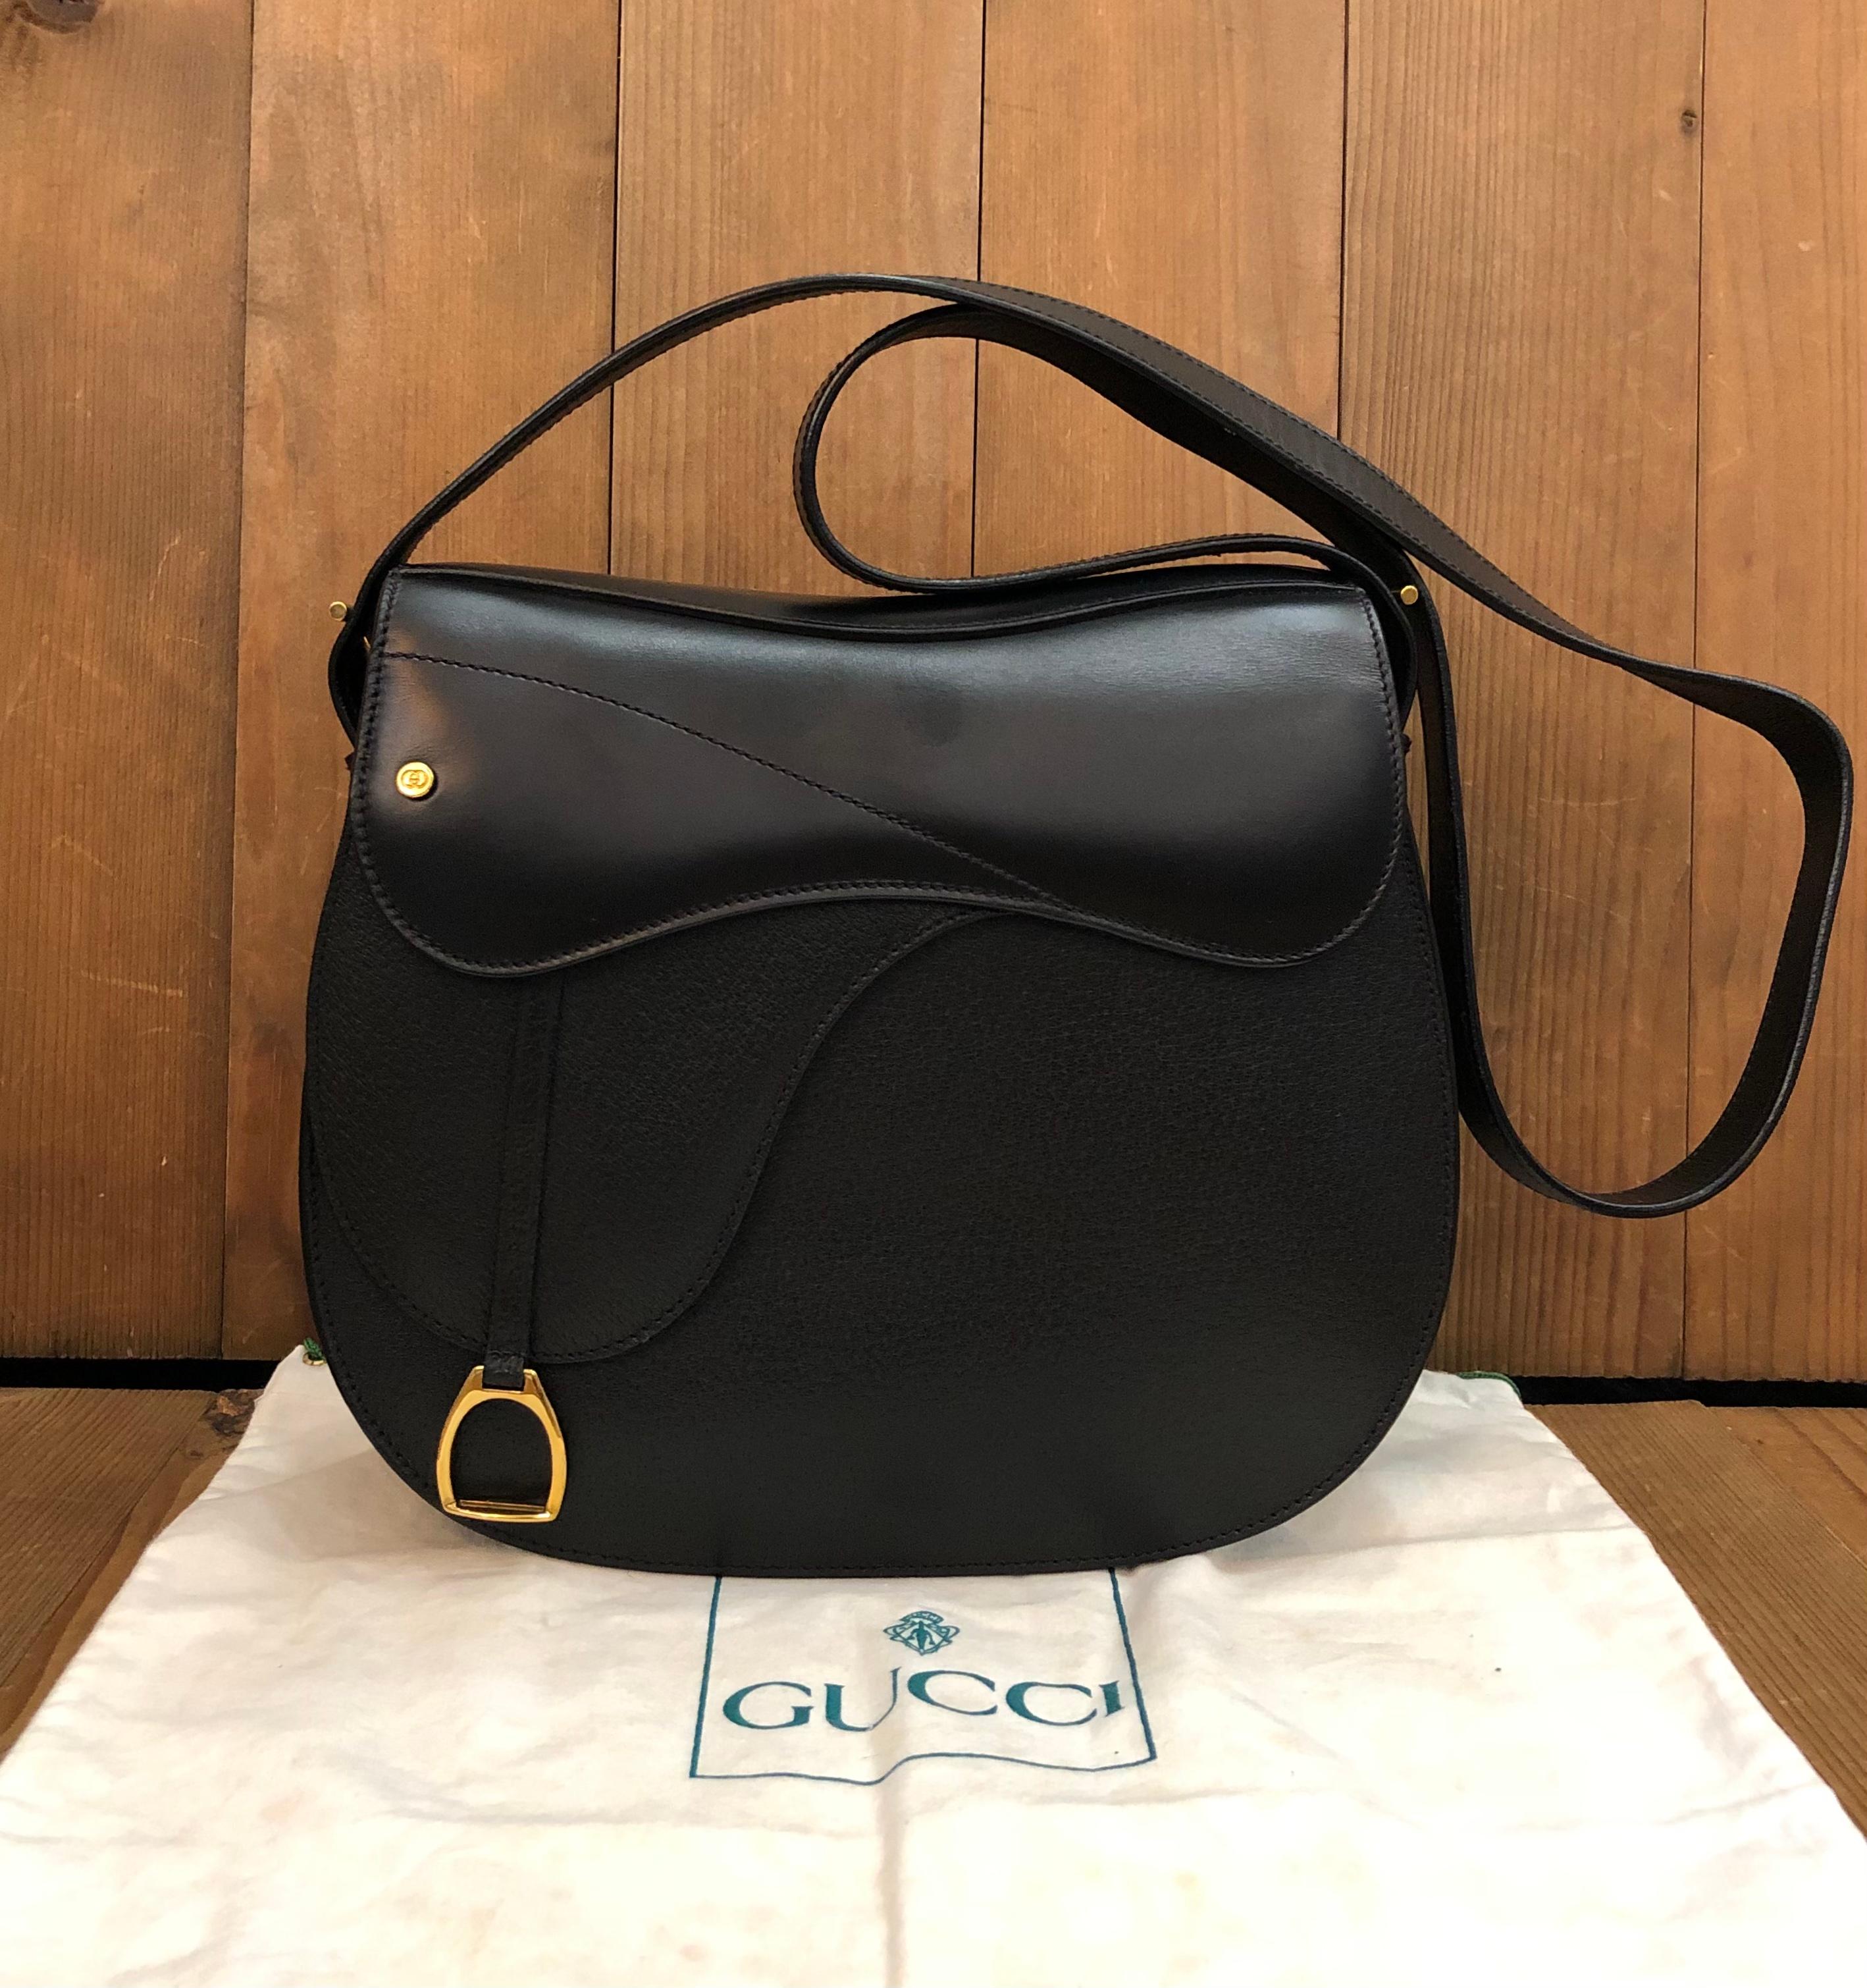 This vintage GUCCI saddle bag is crafted of smooth calfskin and pigskin leather in black featuring gold toned hardware. Front magnetic snap closure opens to a black leather interior featuring a zippered pocket. Made in Italy. Measures approximately